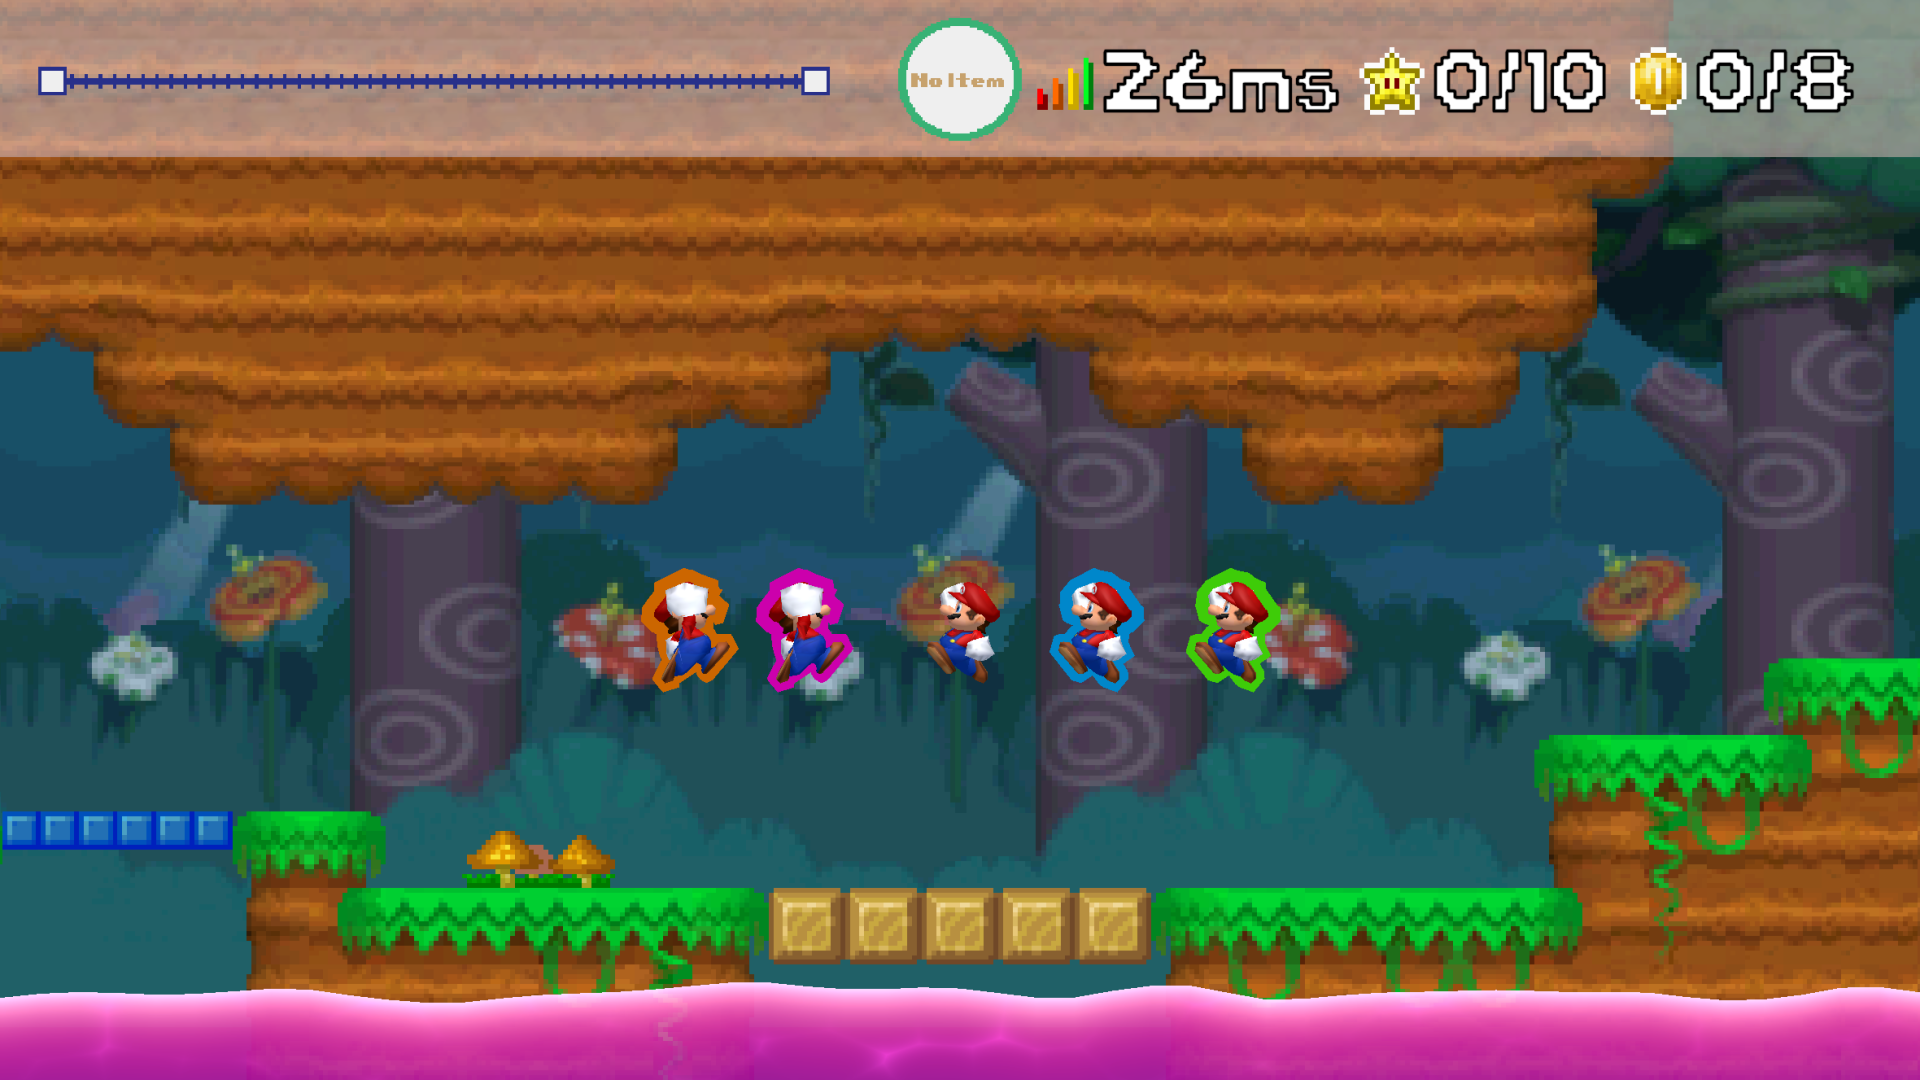 NEW SUPER MARIO WORLD II free online game on